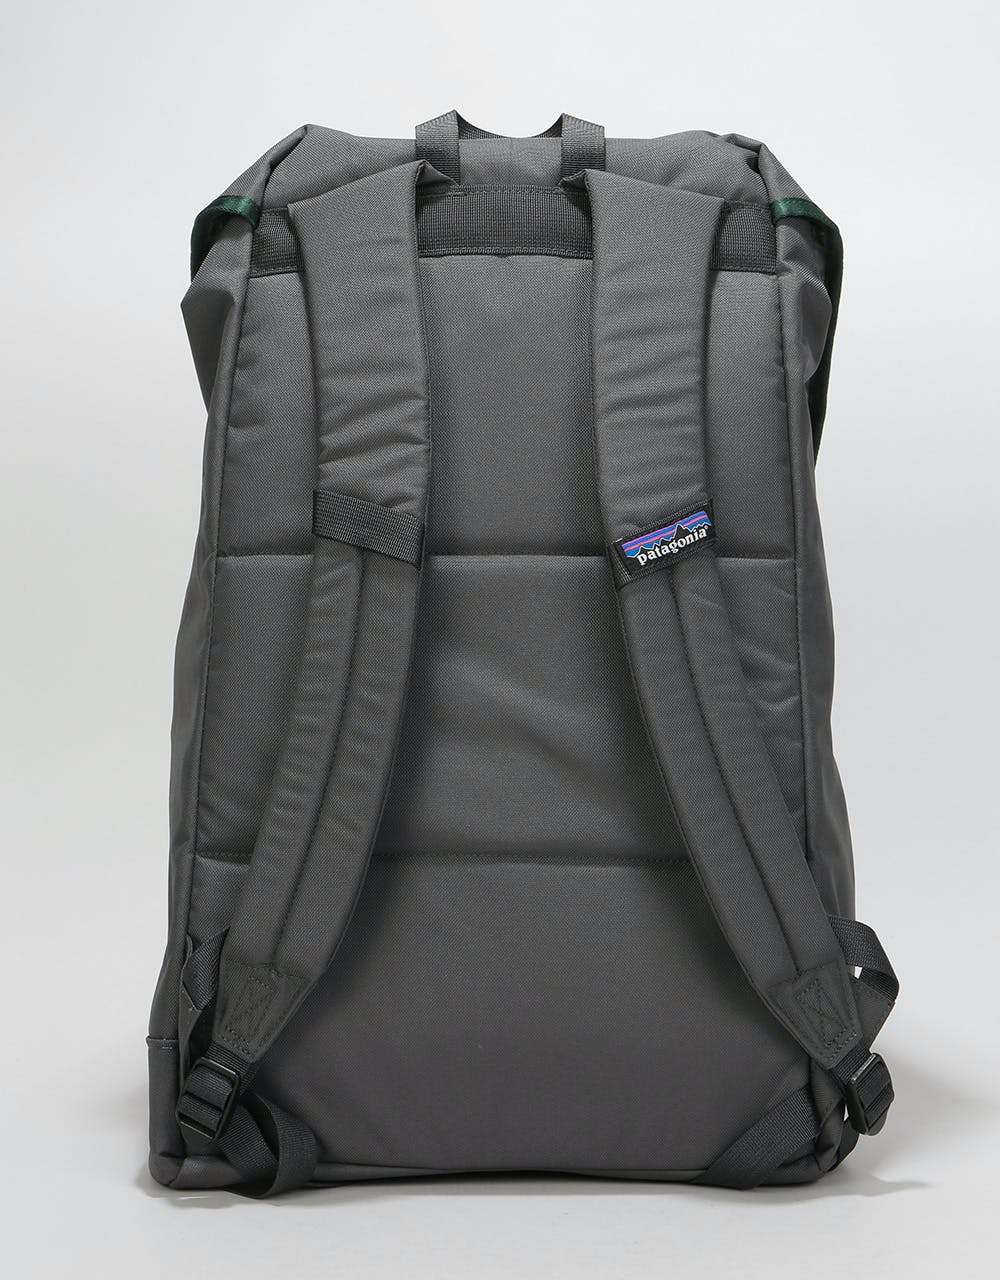 Patagonia Arbor Classic Pack 25L Backpack - Forge Grey